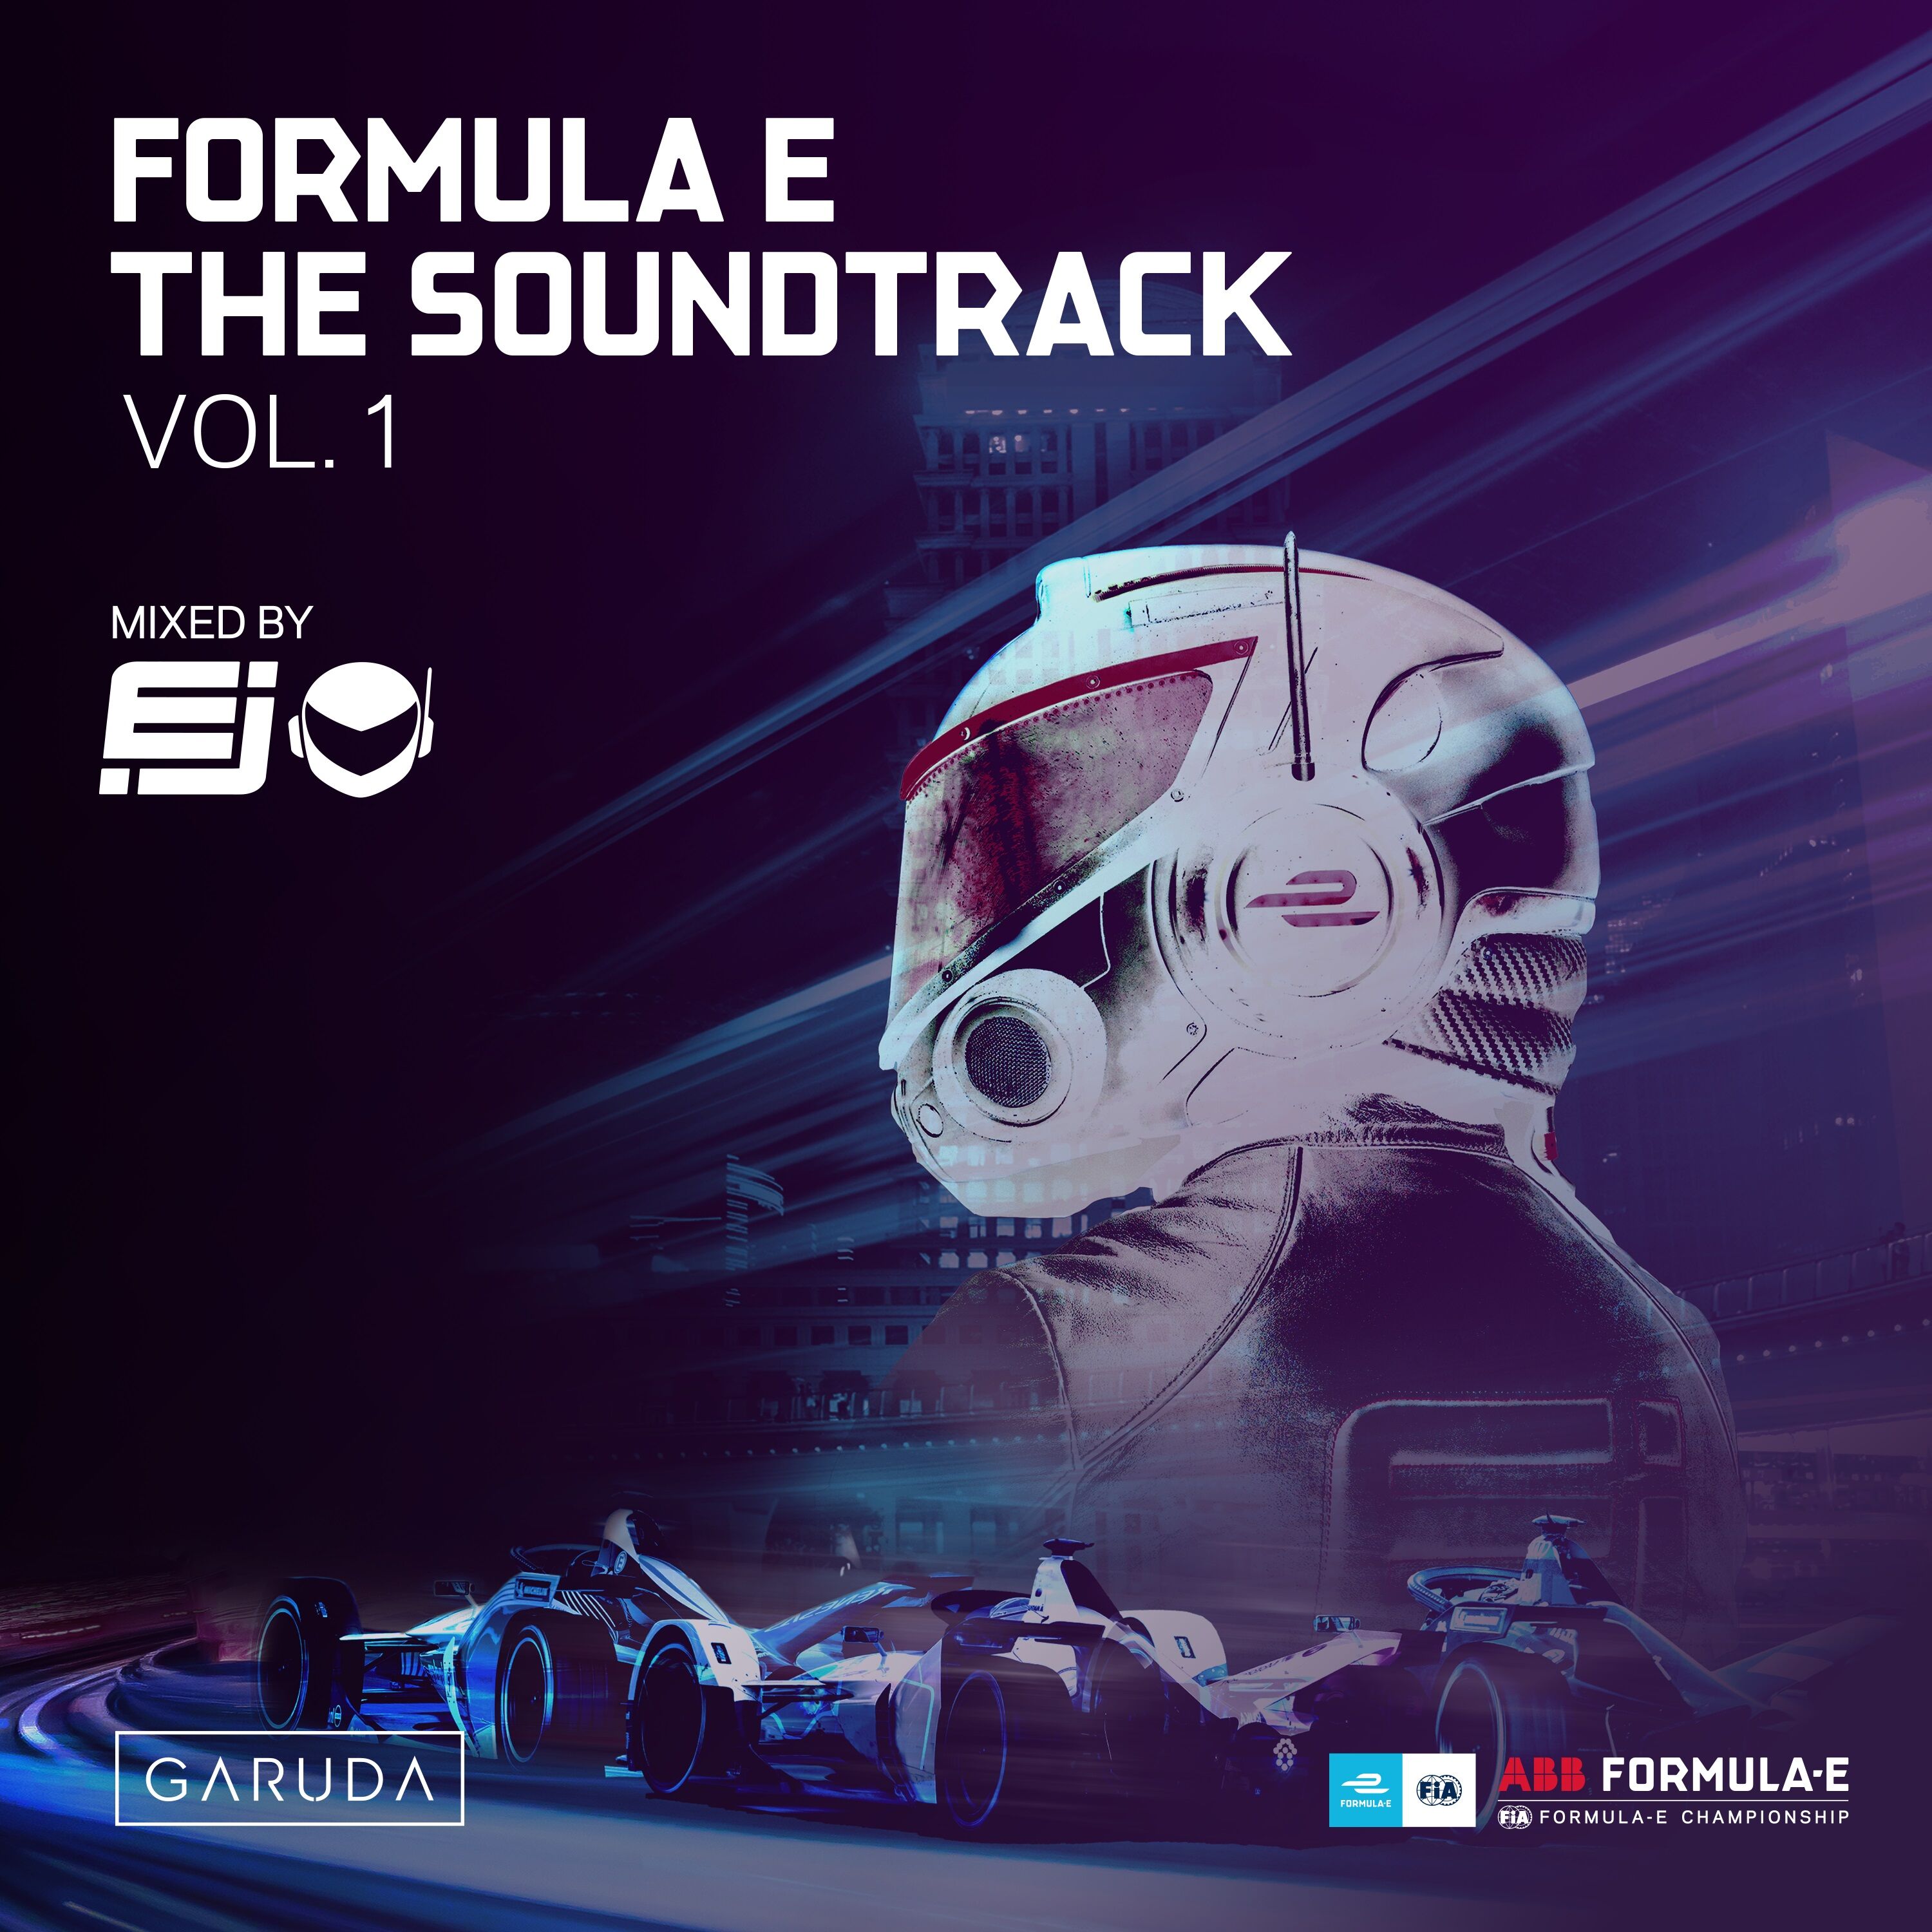 Various Artists presents Formula E: The Soundtrack Volume One mixed by EJ on Garuda